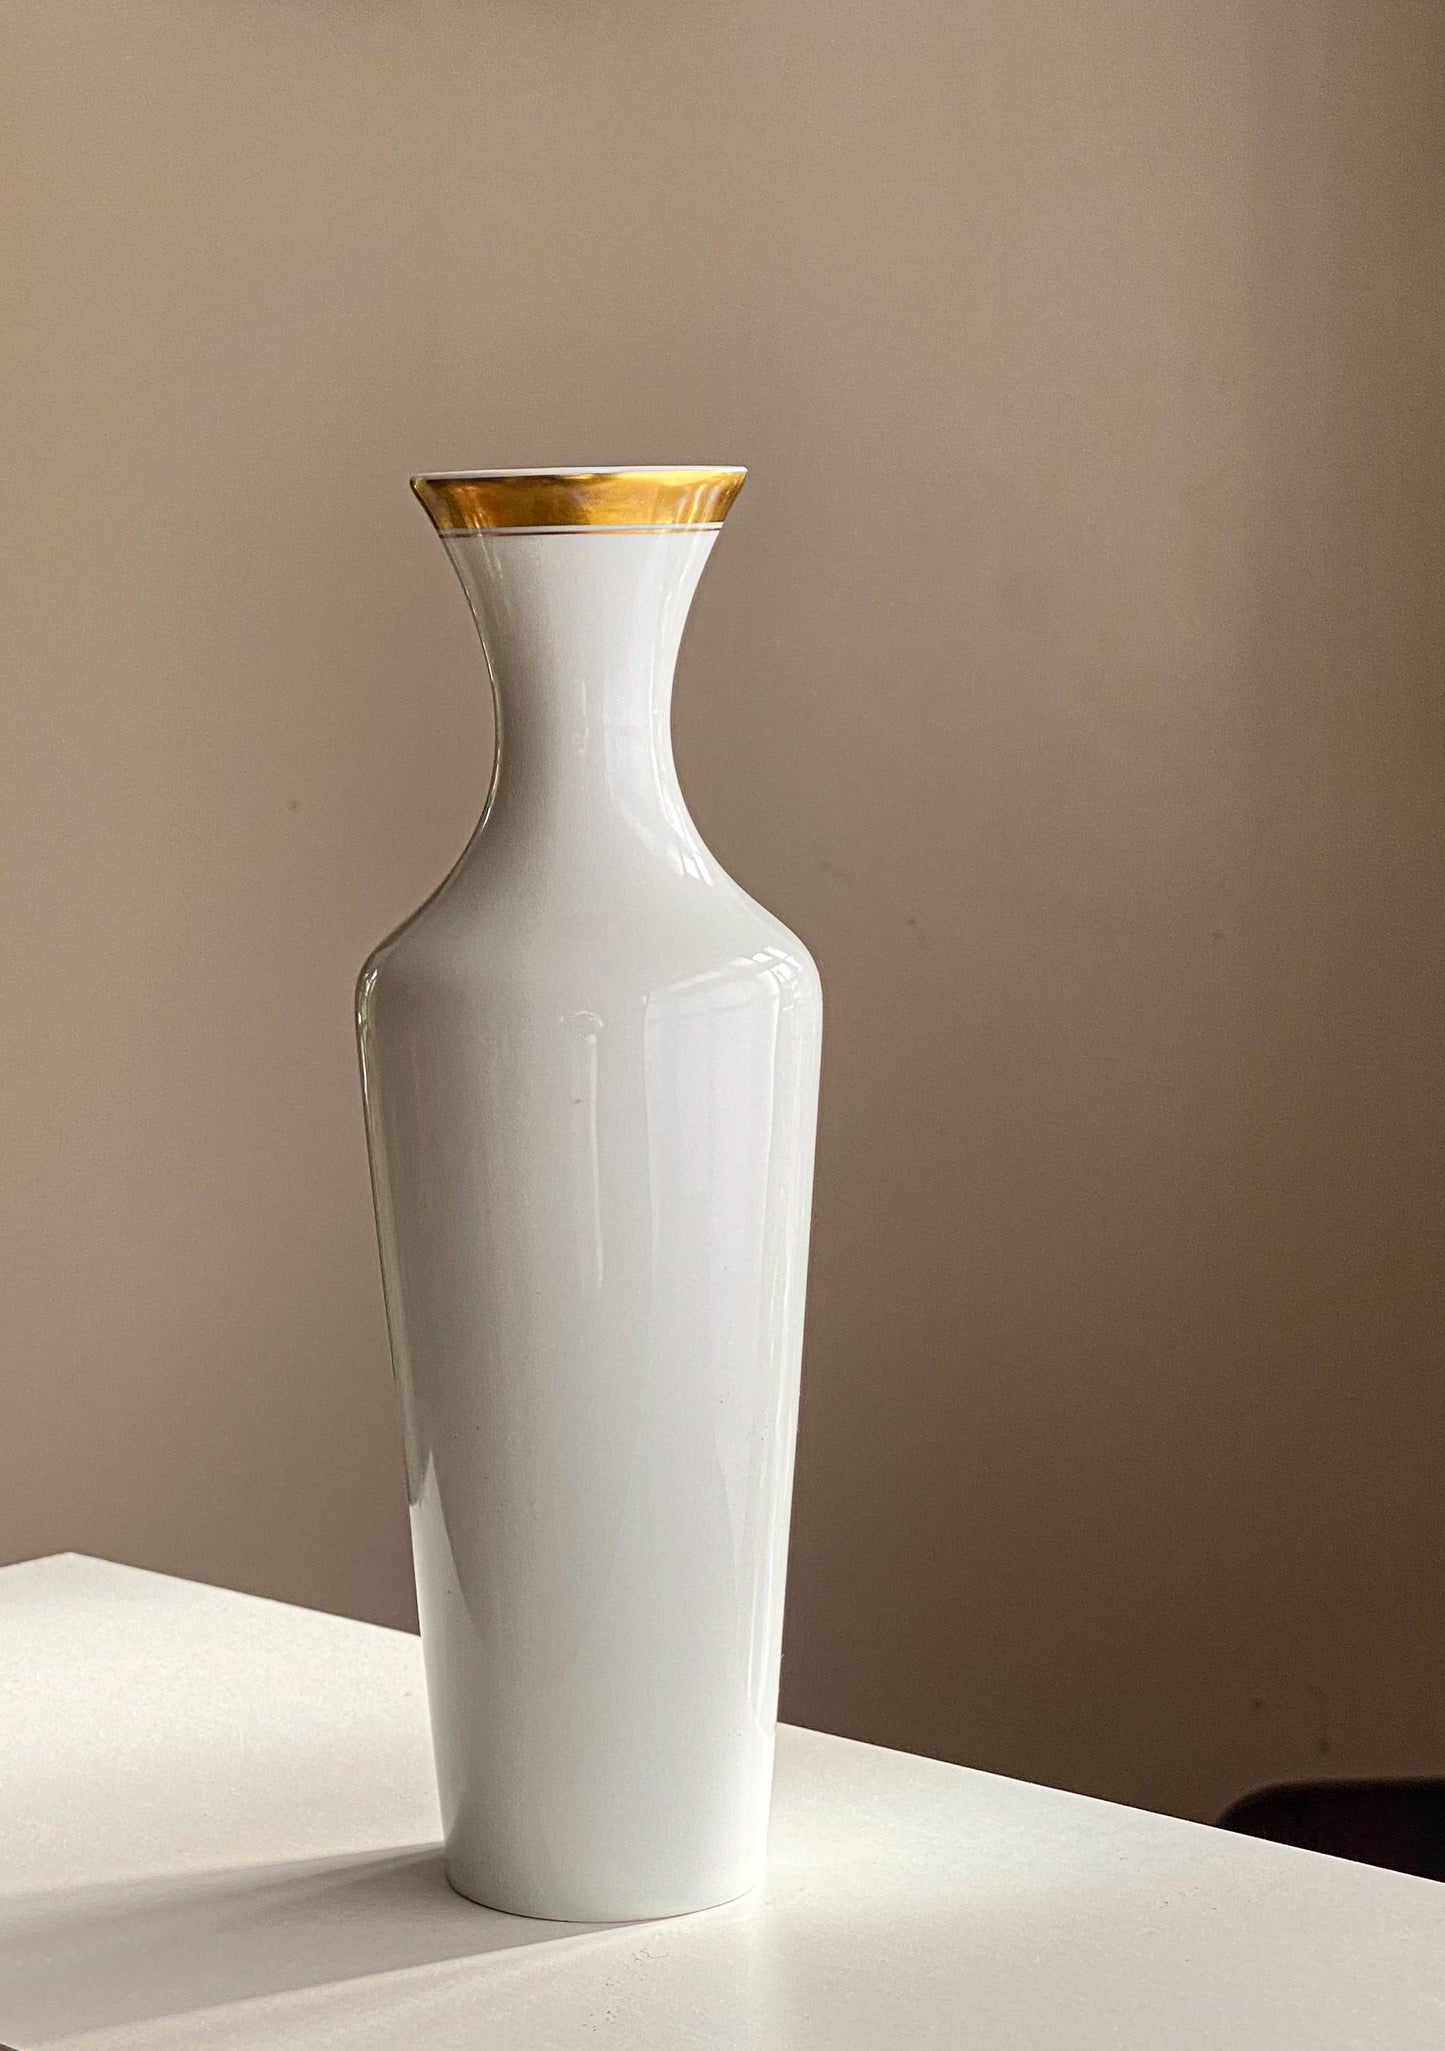 Hutschenreuther Selb Porcelain Vase Design by Robert Broch with  gold decor 1960/70s